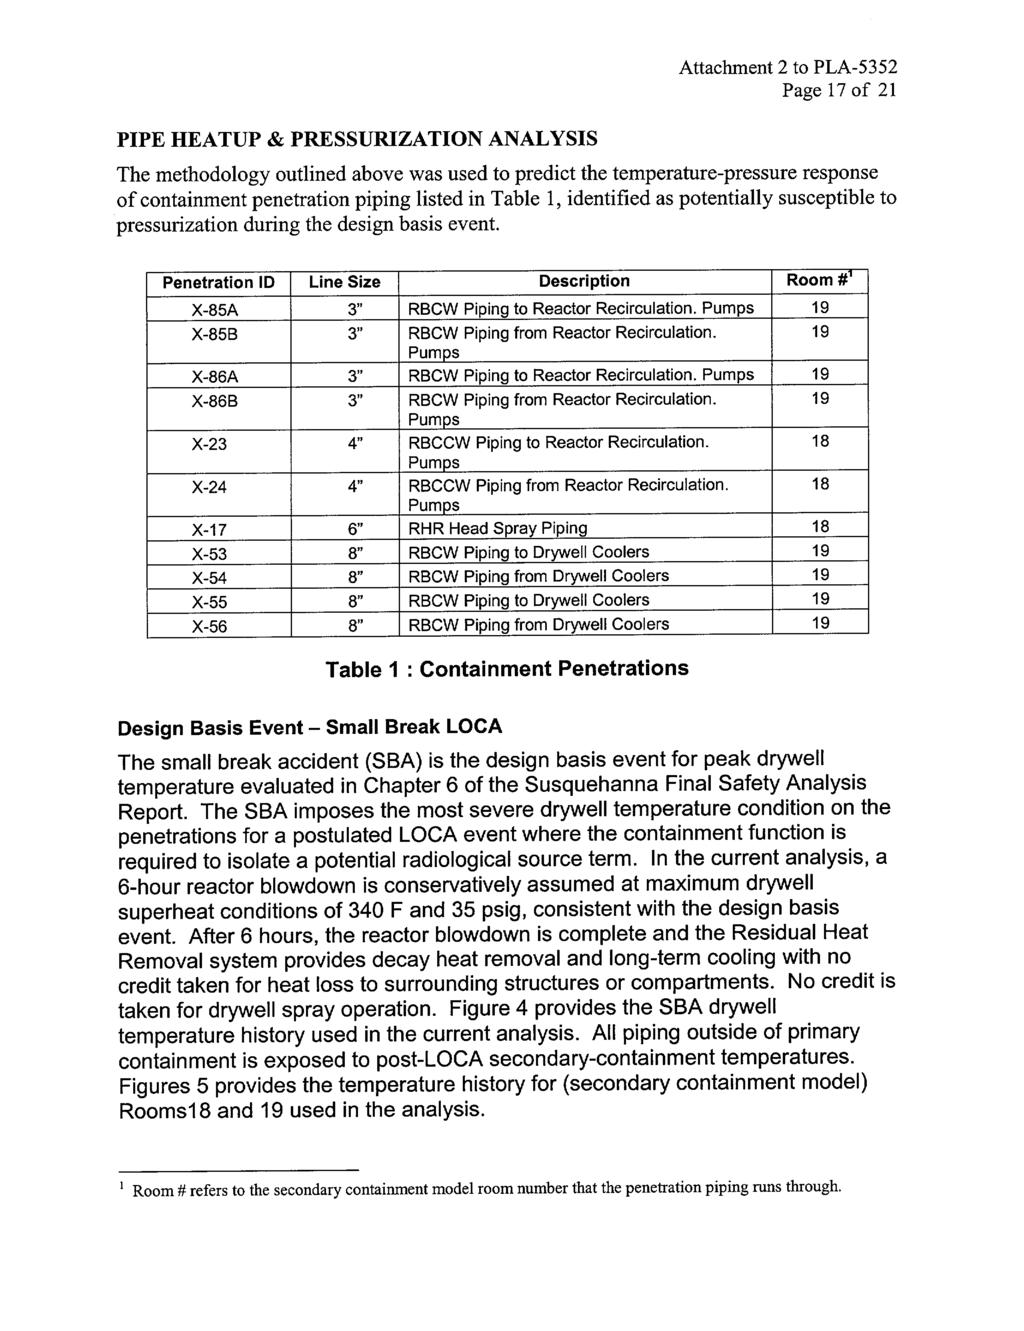 PIPE HEATUP & PRESSURIZATION ANALYSIS Attachment 2 to PLA-5352 Page 17 of 21 The methodology outlined above was used to predict the temperature-pressure response of containment penetration piping